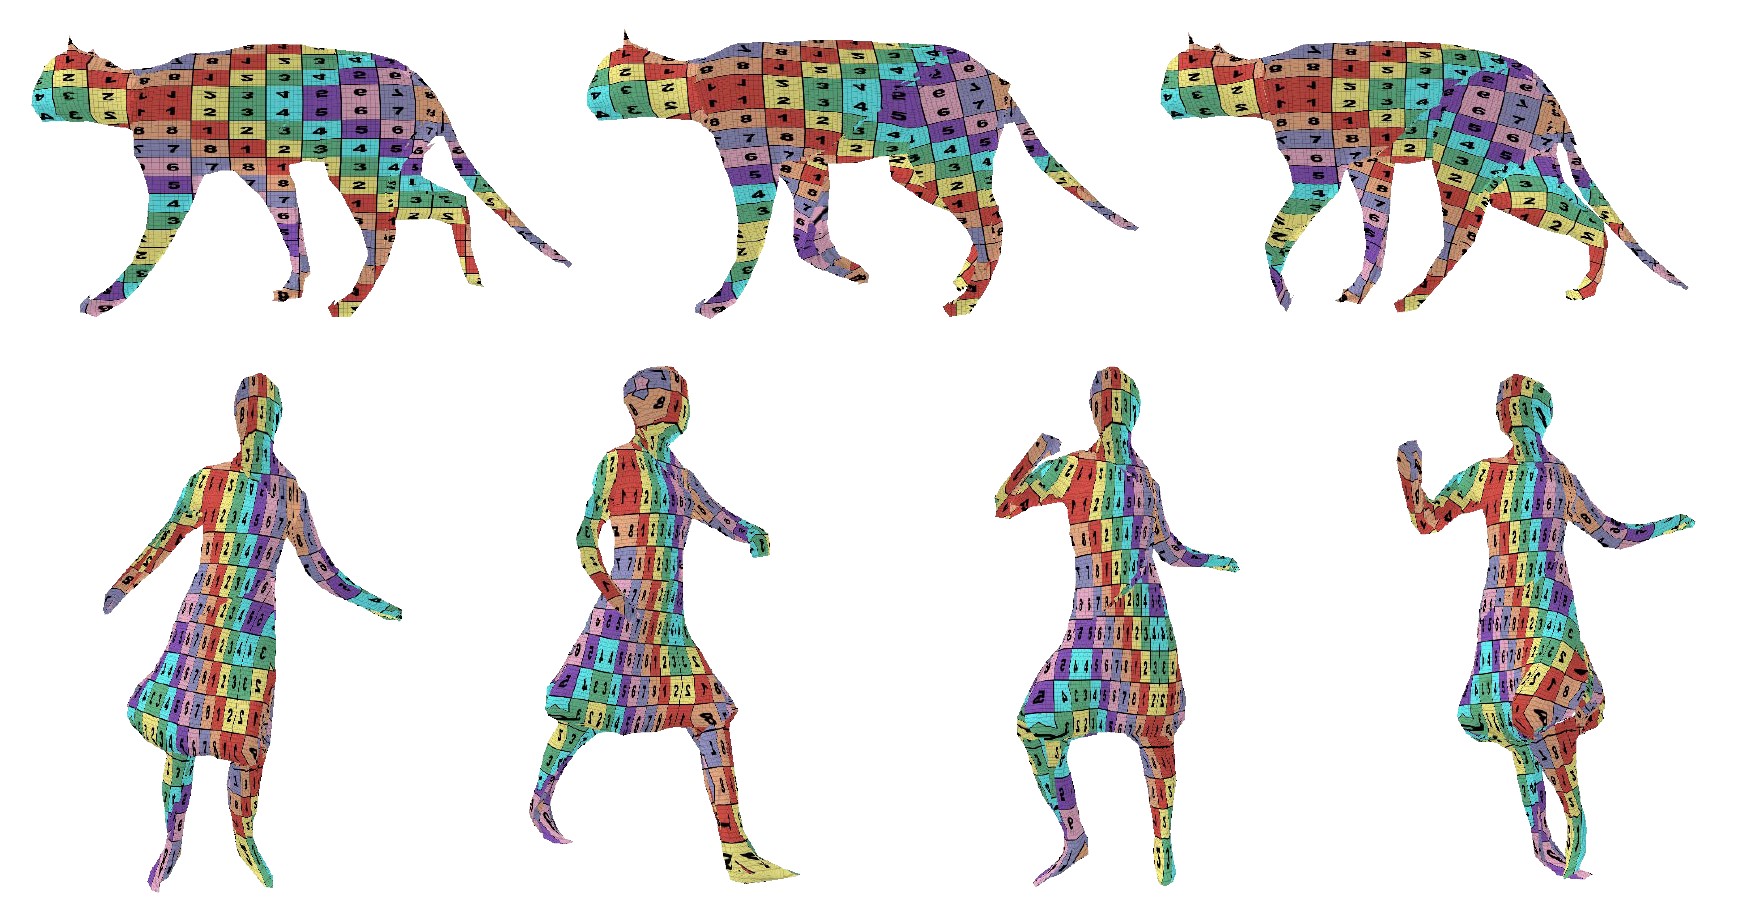 A sequence of reconstructed surfaces using our algorithm, exhibiting good consistent correspondences between each frame in the sequence them (visualized via texture that exhibits the correspondence).